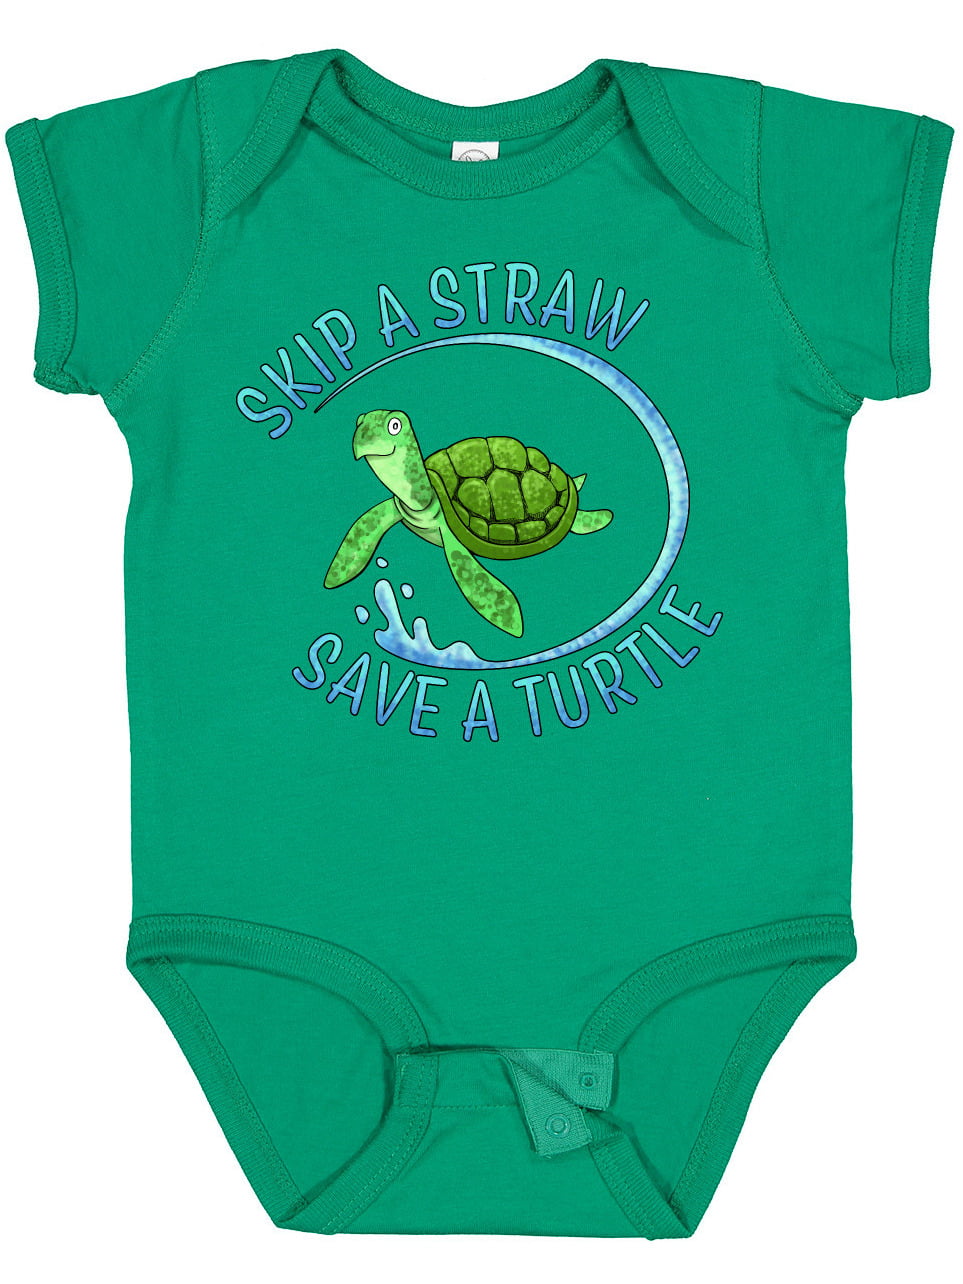 Inktastic Skip a Straw Save a Turtle with Cute Green Sea Turtle